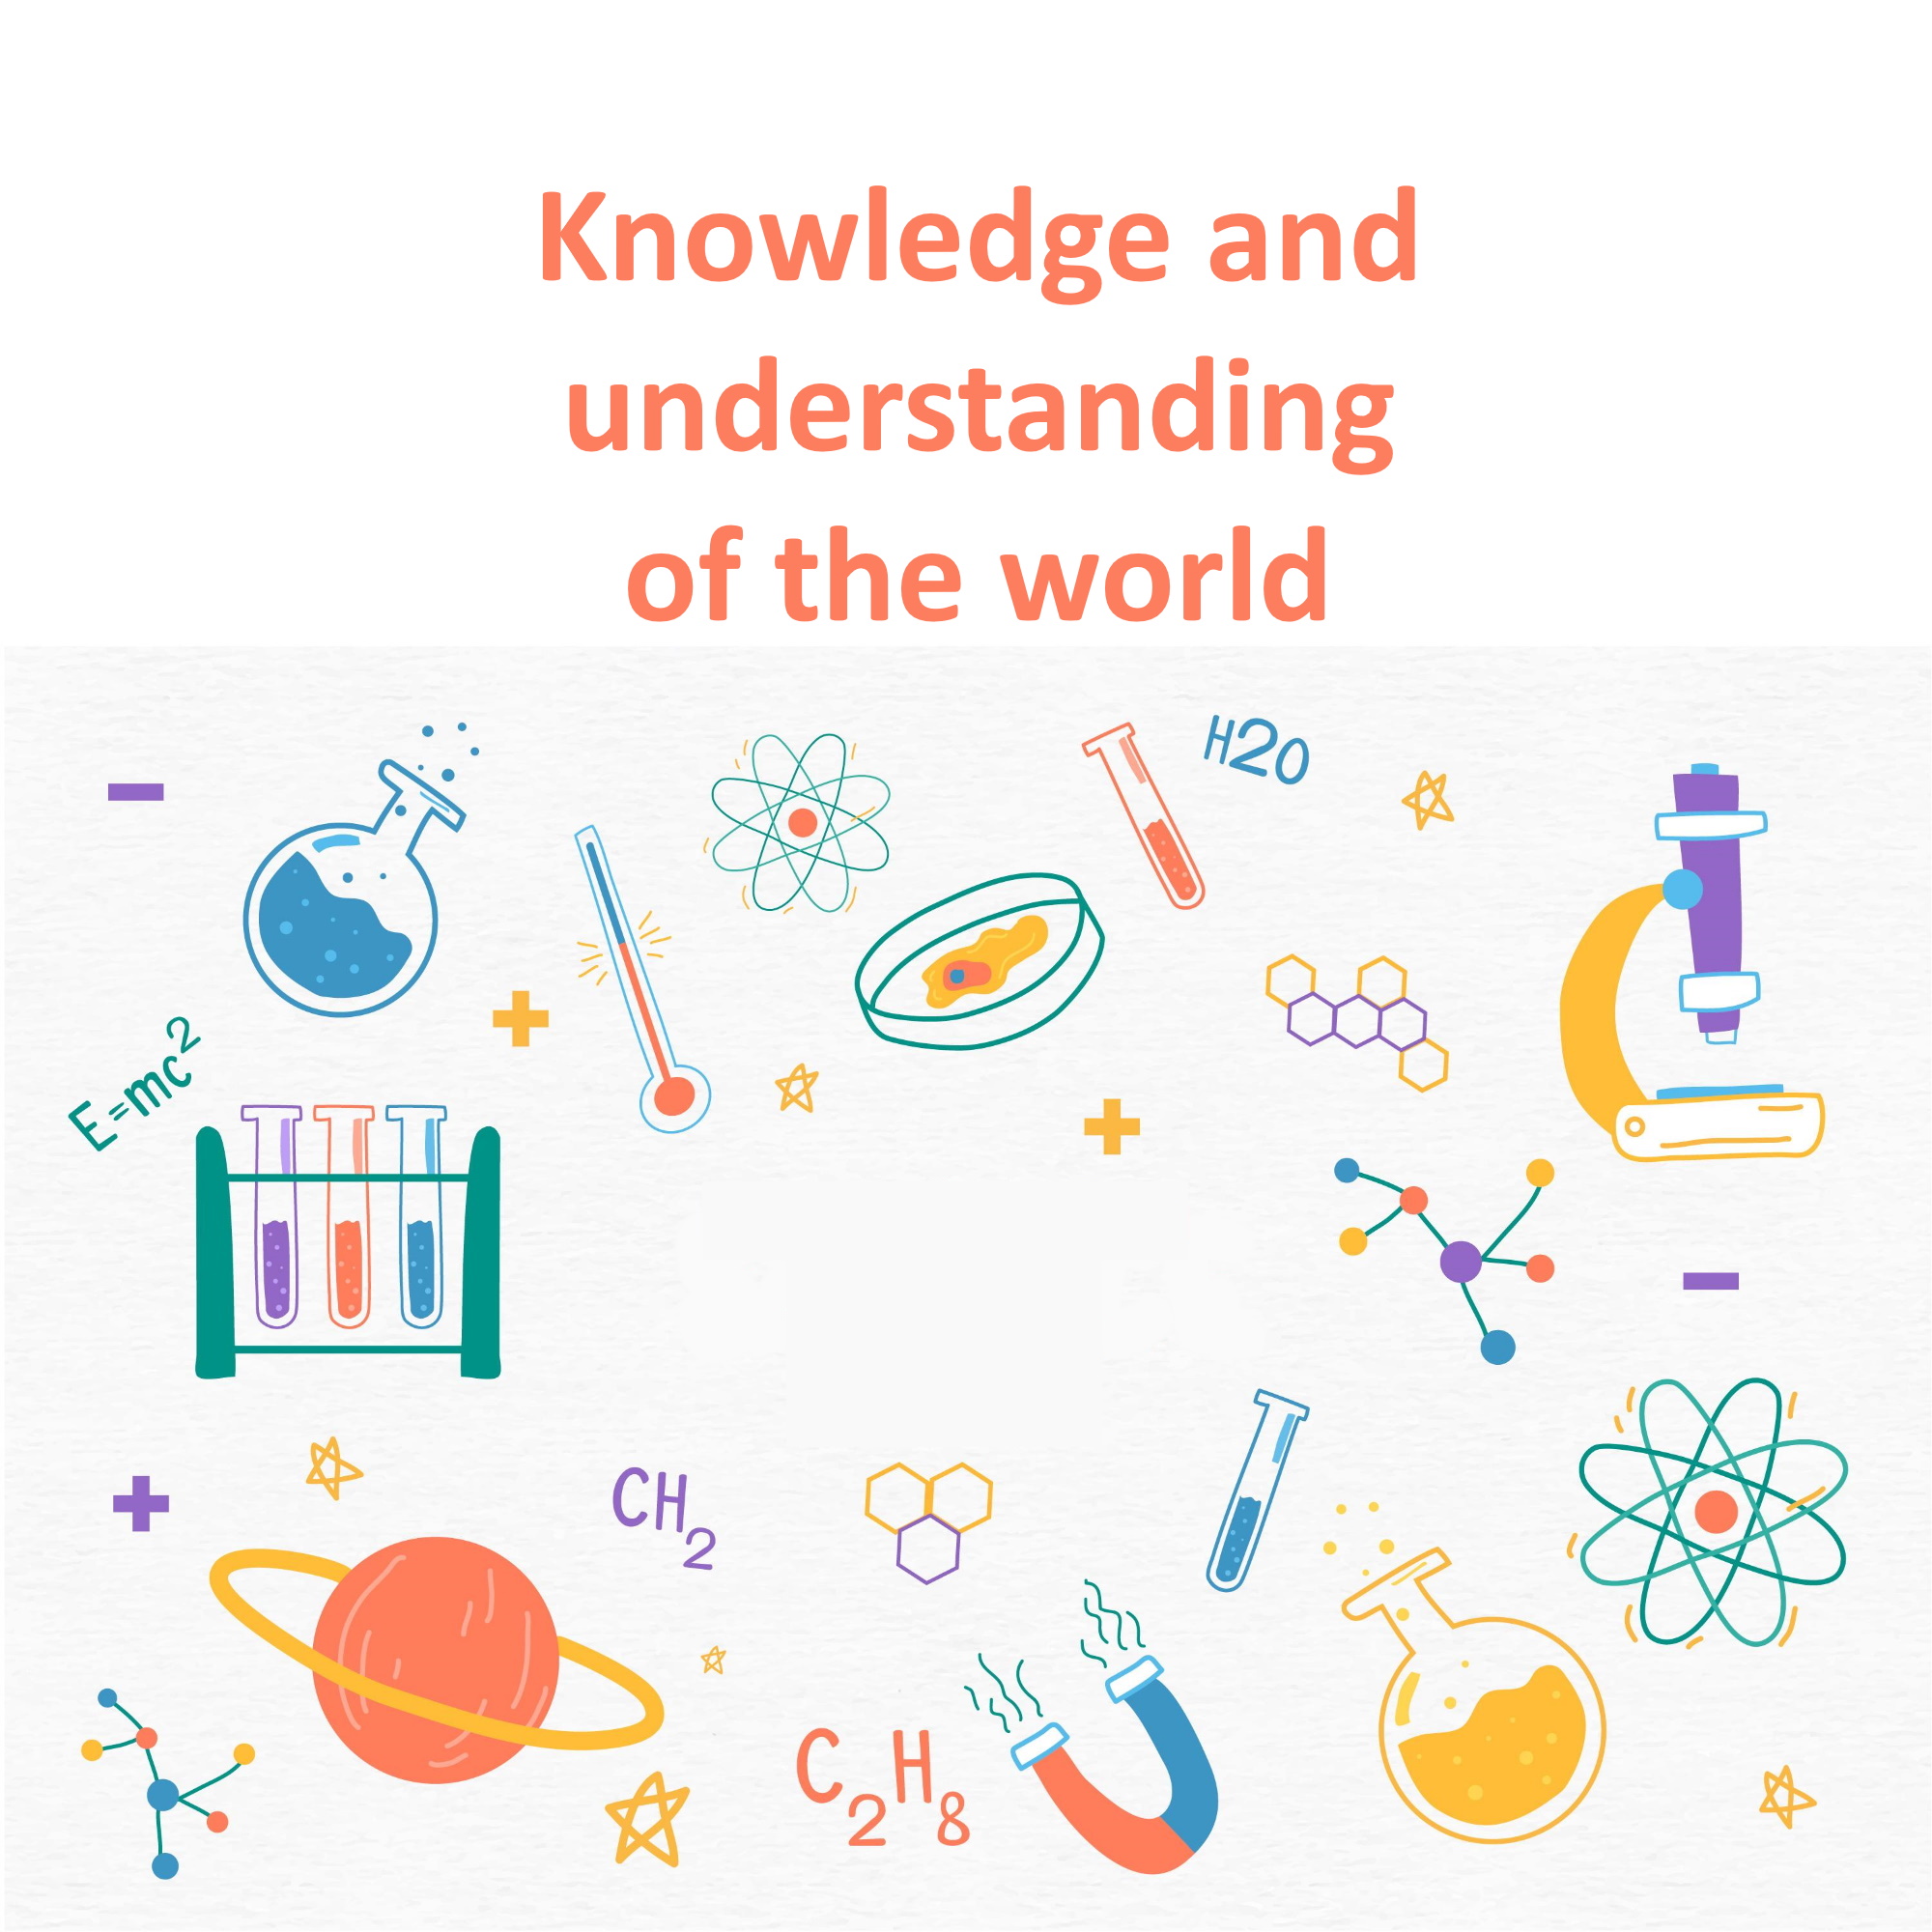 Knowledge and understanding of the world